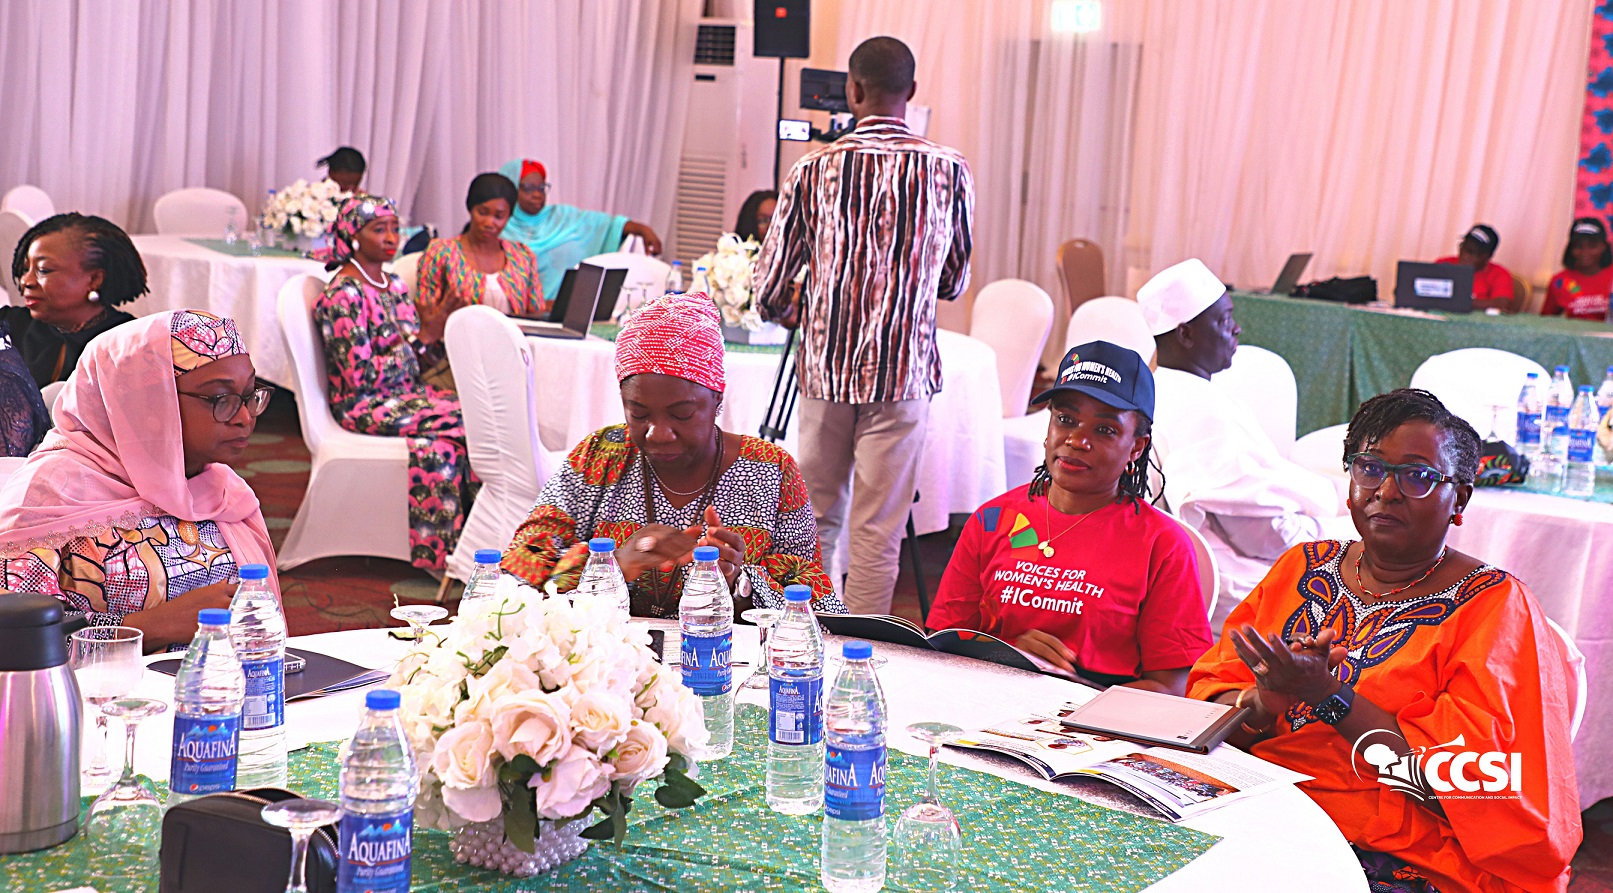 Stakeholders come together to advance the health and rights of girls and women in Nigeria